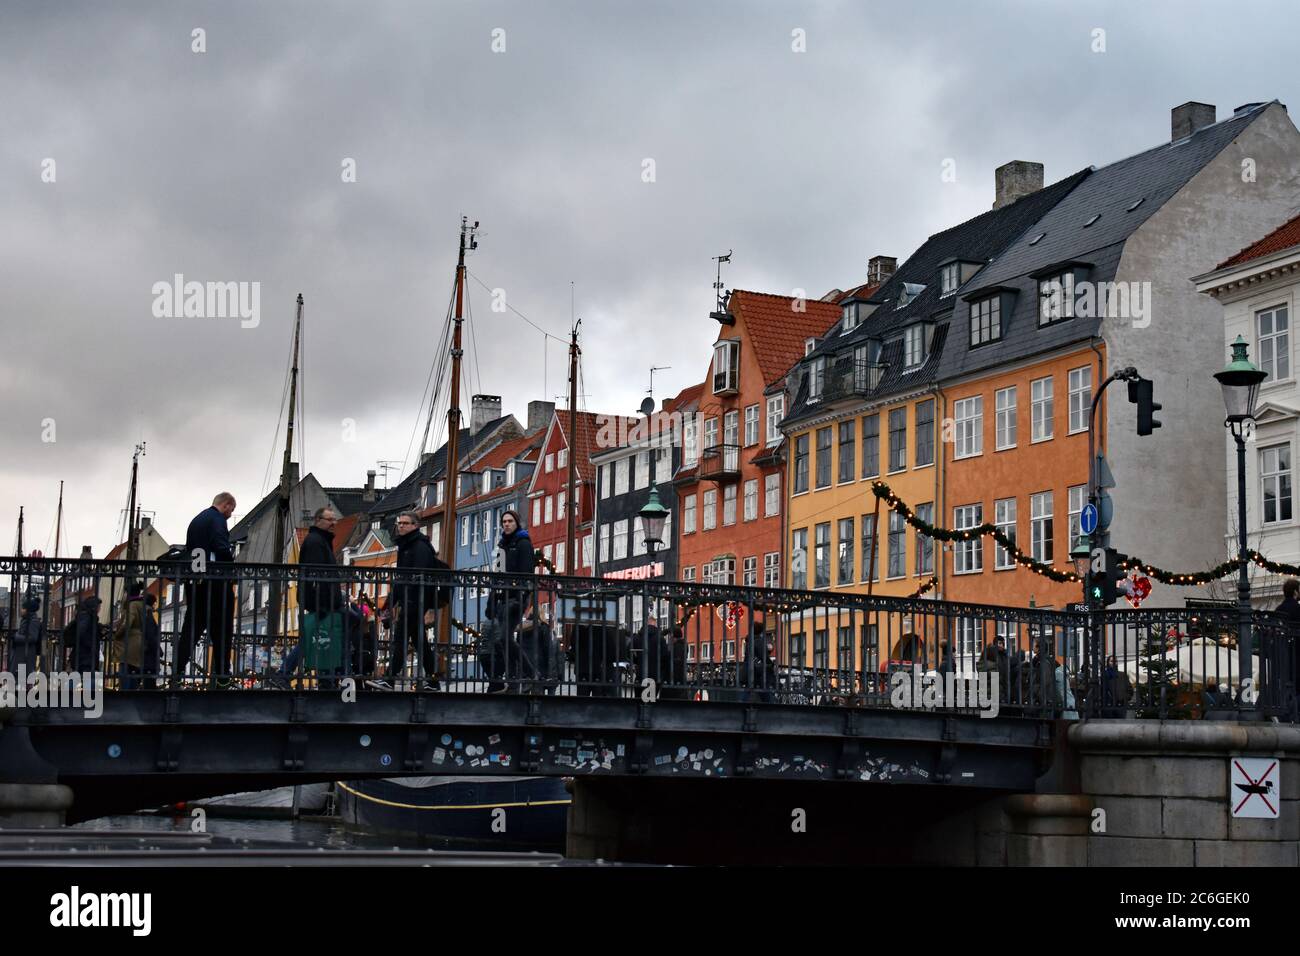 The colourful townhouses on the northern side of Nyhavn Canal behind the bridge.  Masts from sail boats can also be seen against the grey skies. Stock Photo